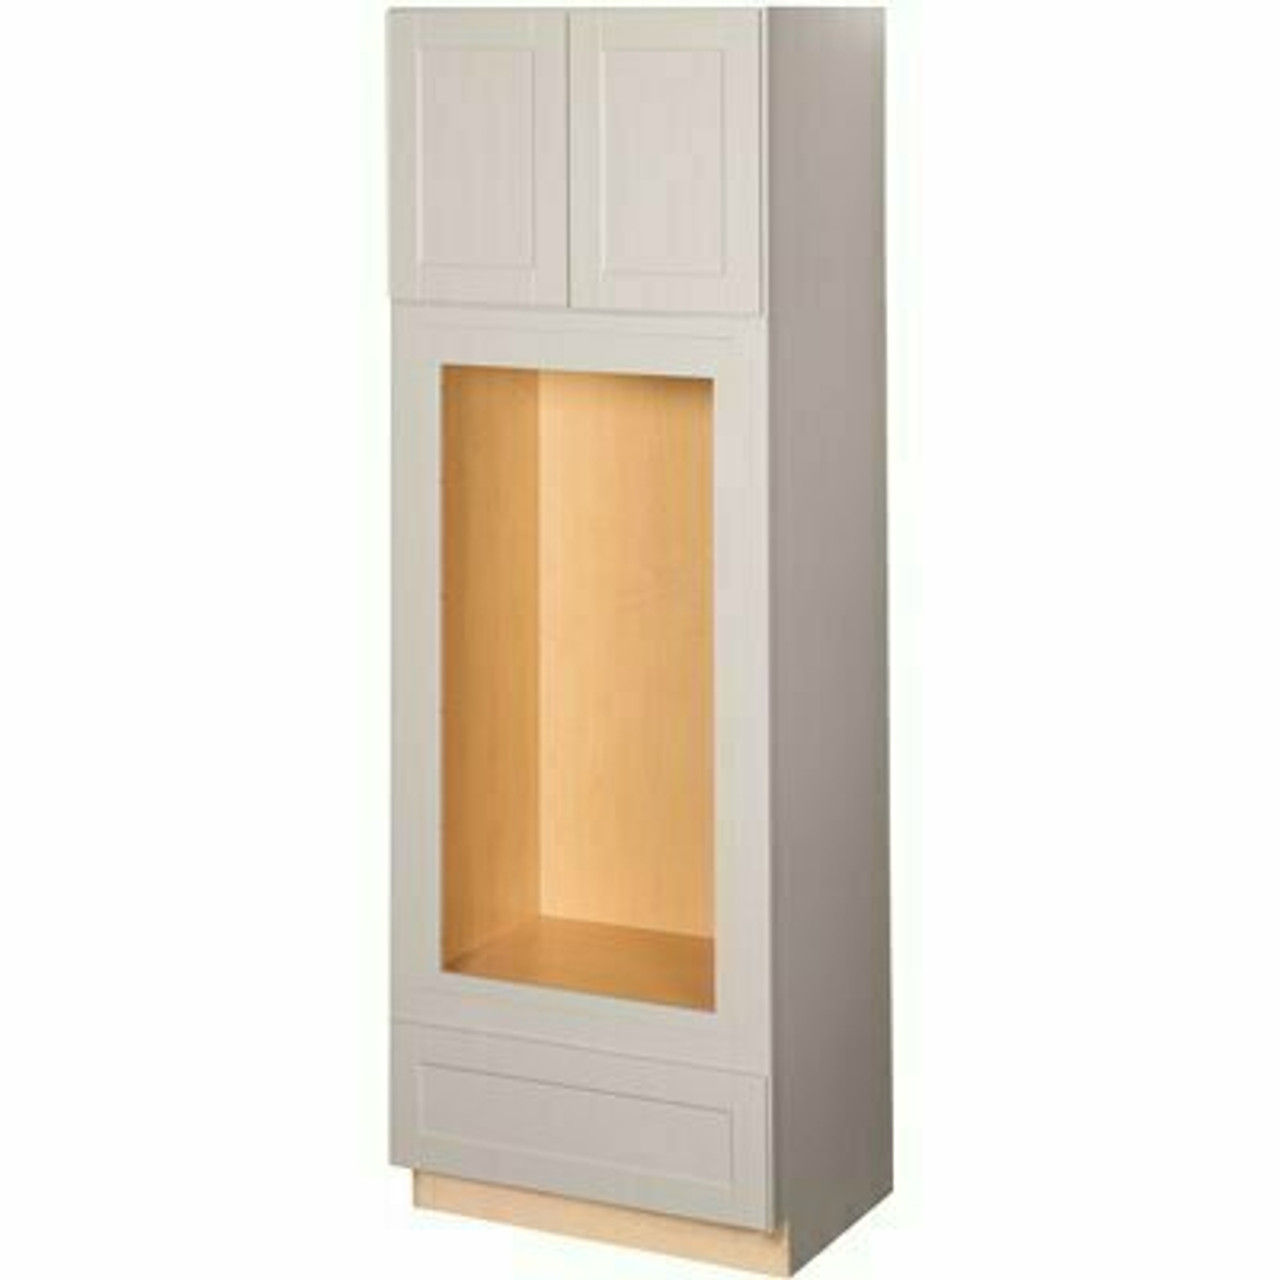 Hampton Bay Shaker Assembled 33X96X24 In. Double Oven Kitchen Cabinet In Dove Gray